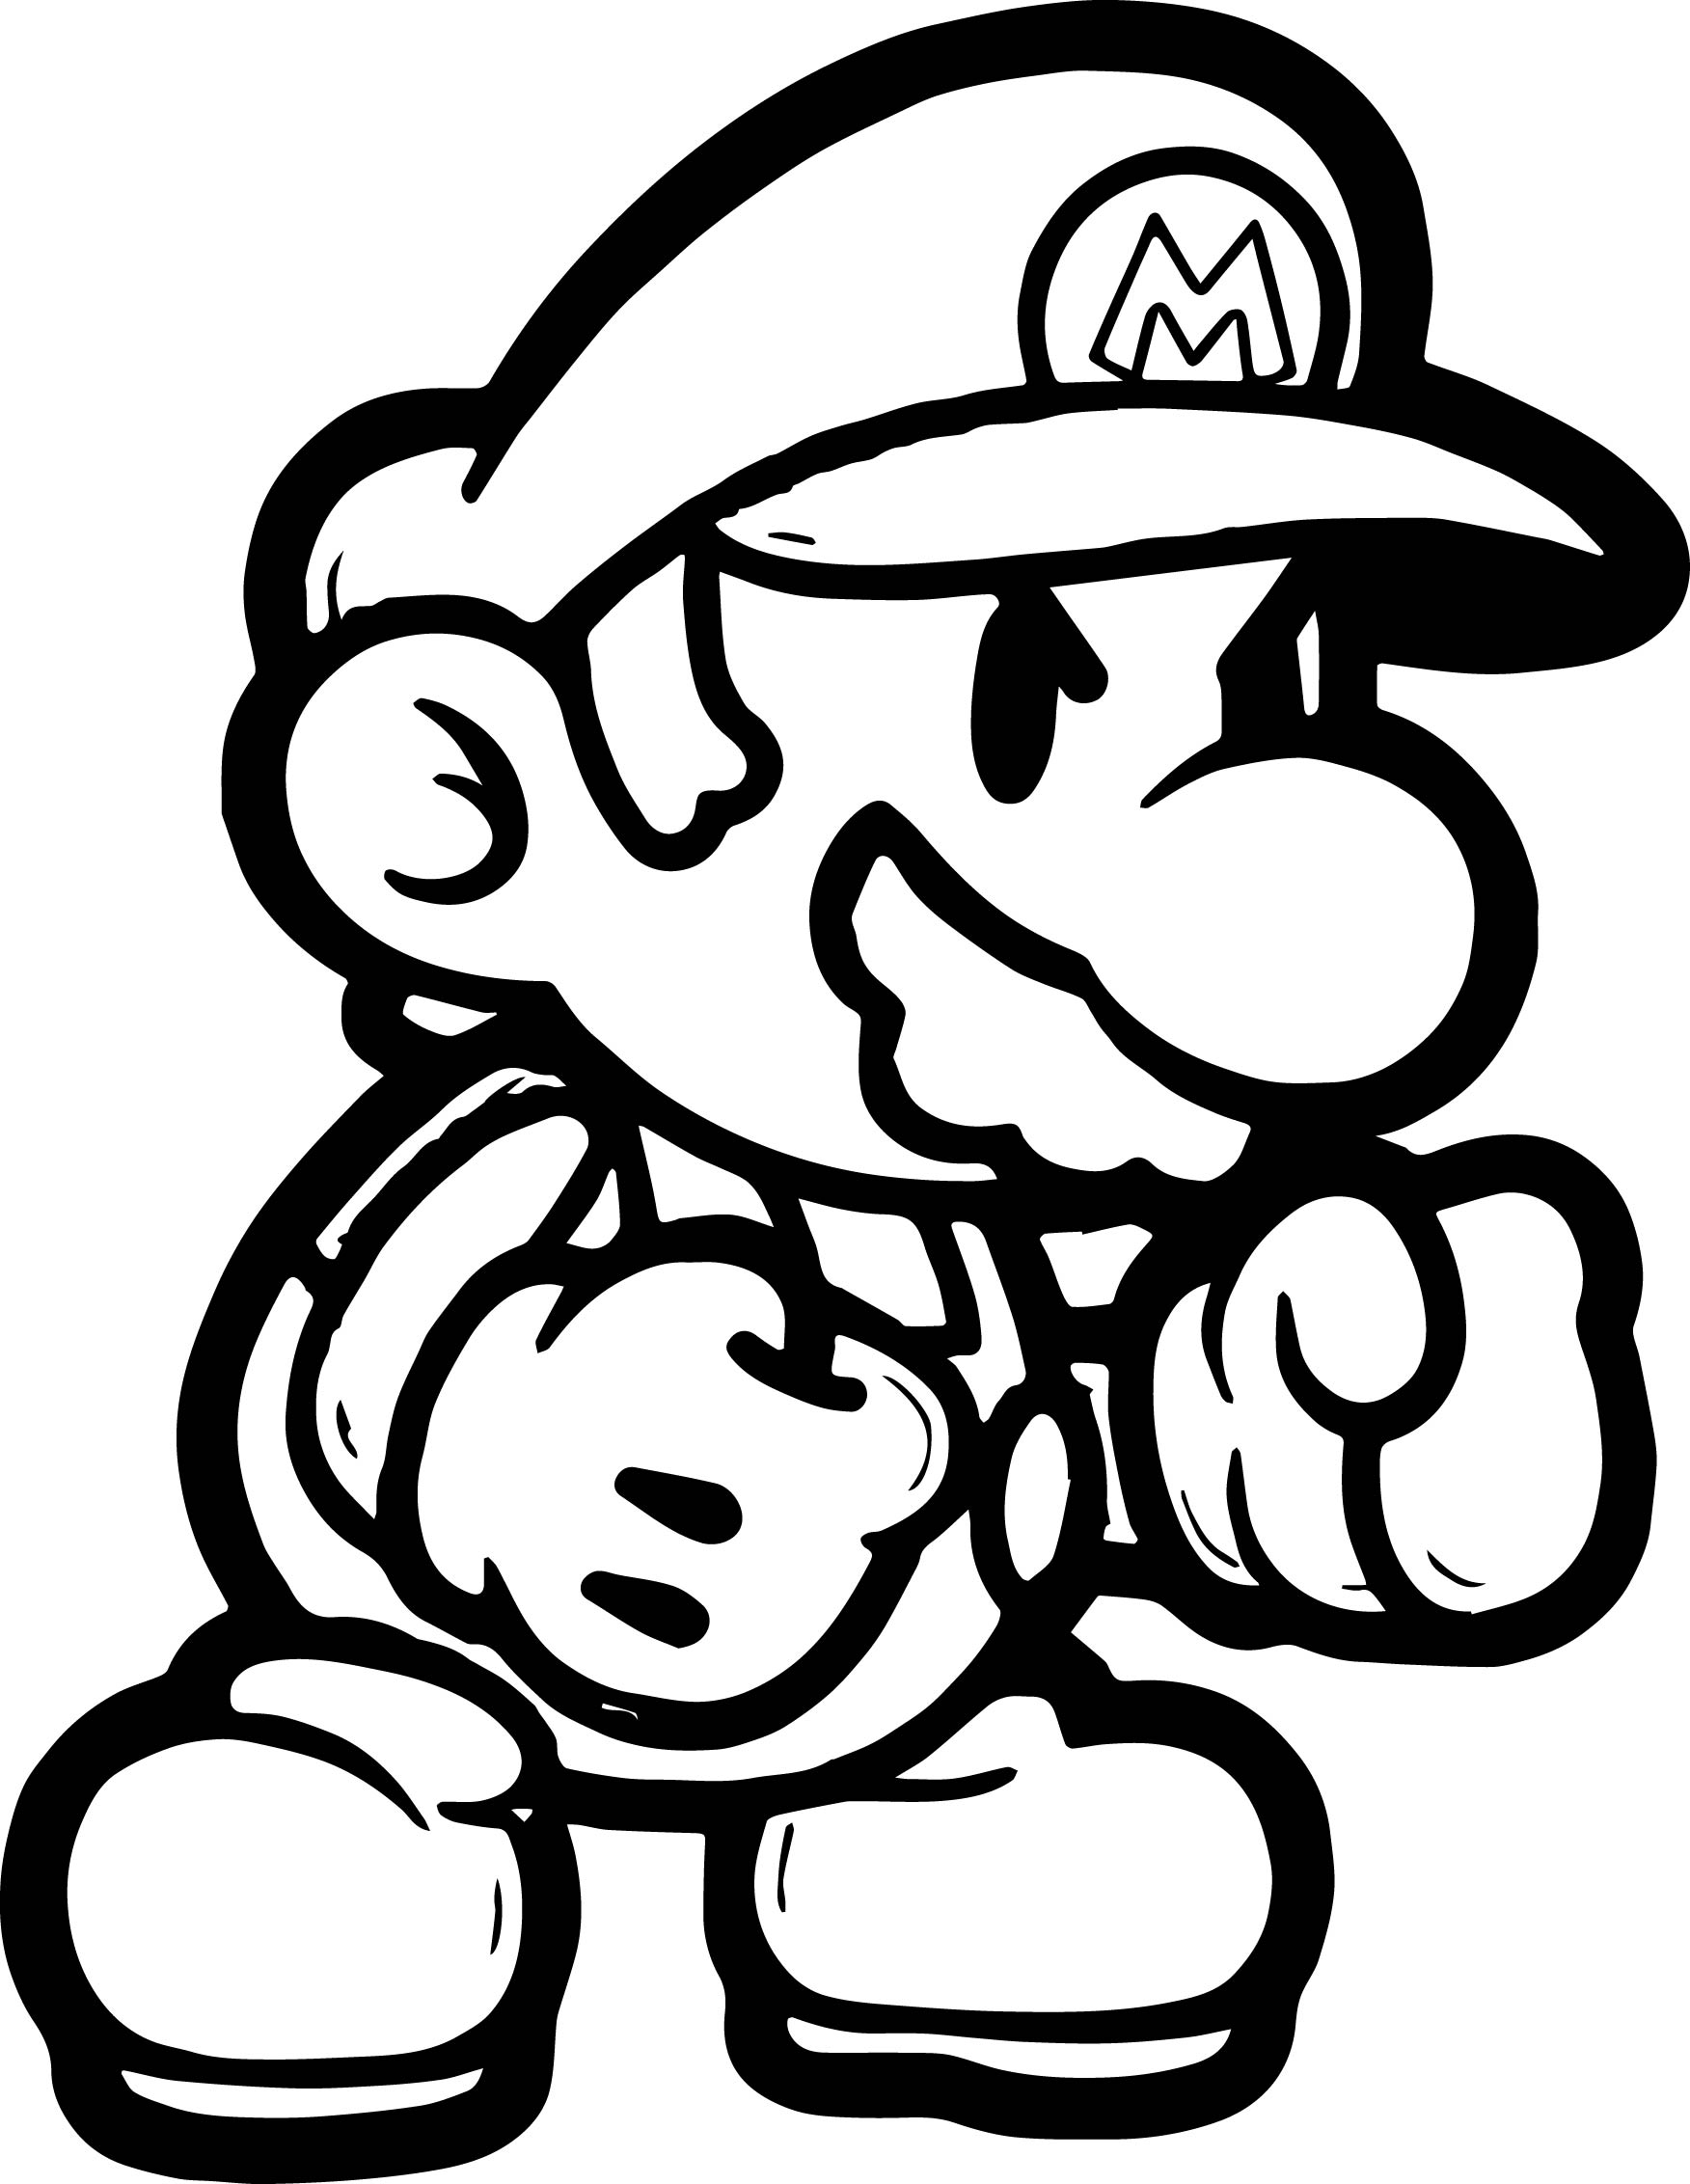 Paper Mario Coloring Pages To Print at